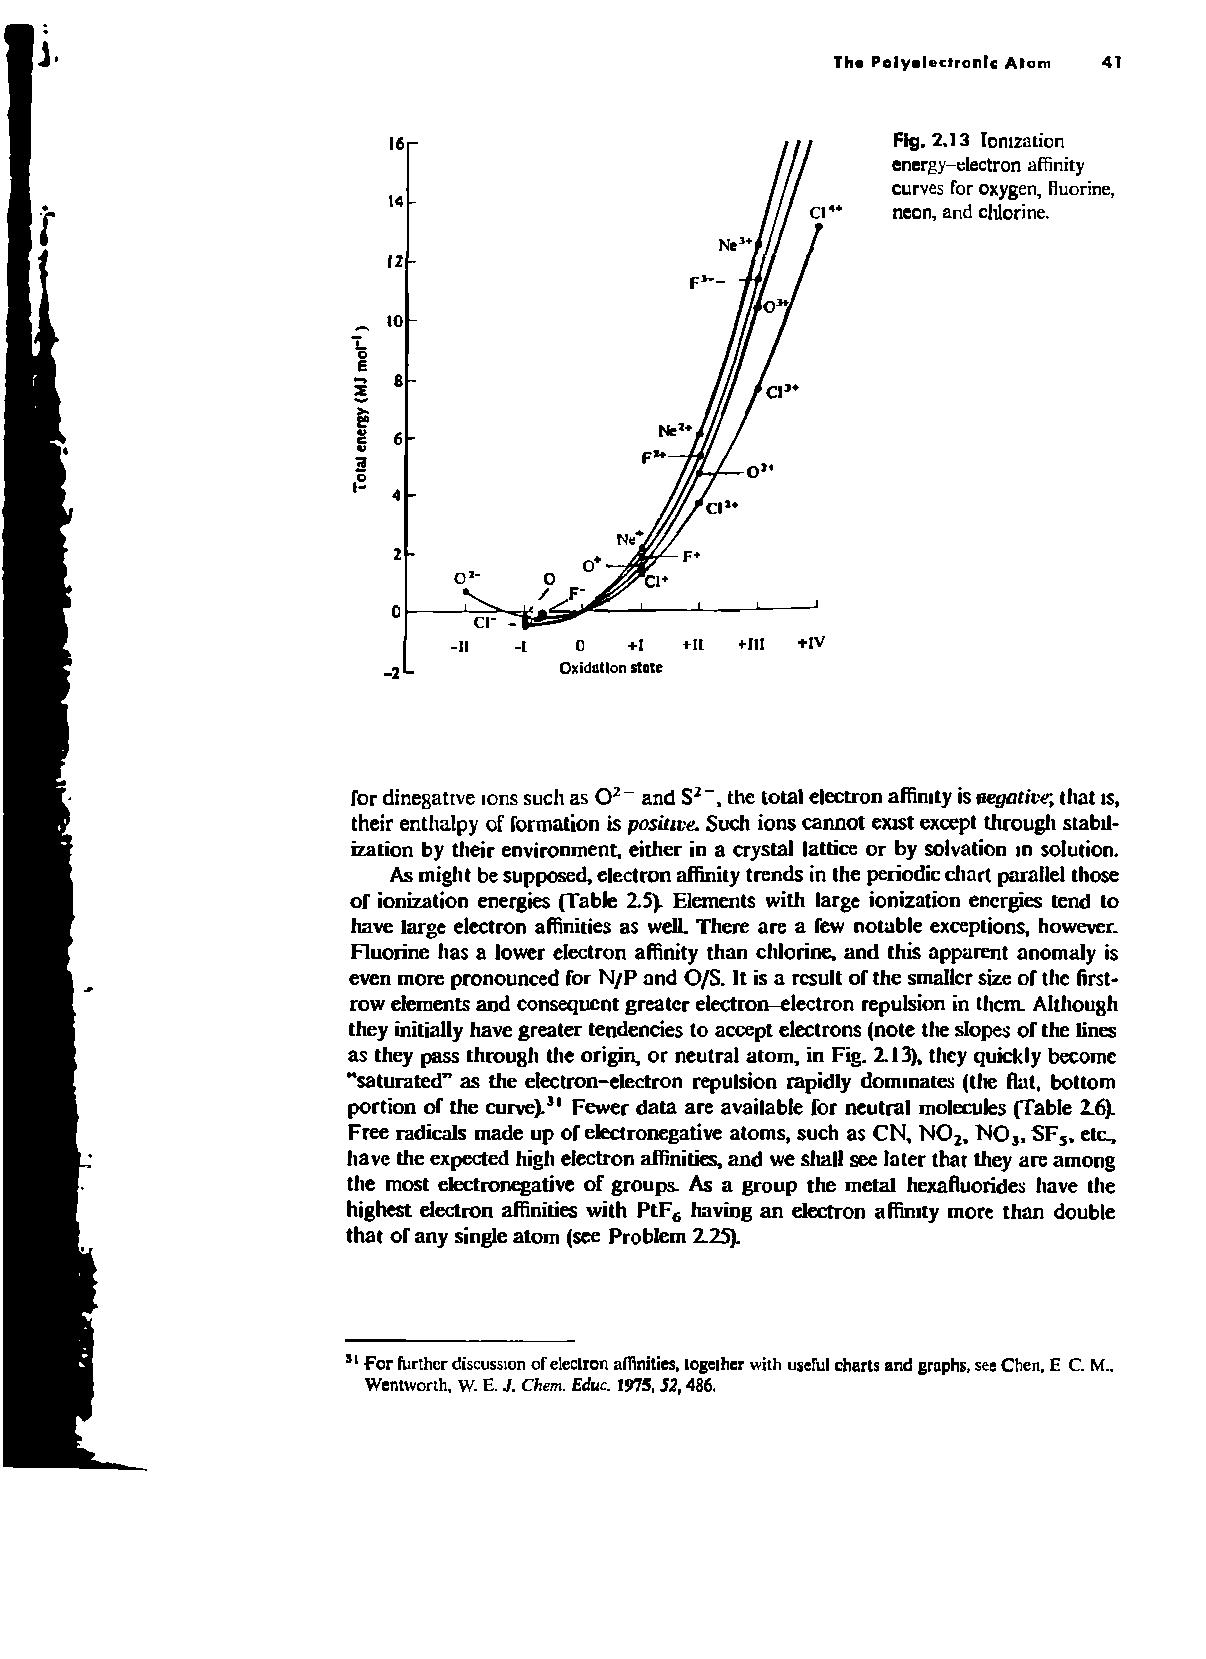 Fig. 2.13 Ionization energy-electron affinity curves for oxygen, fluorine, neon, and clilorine.